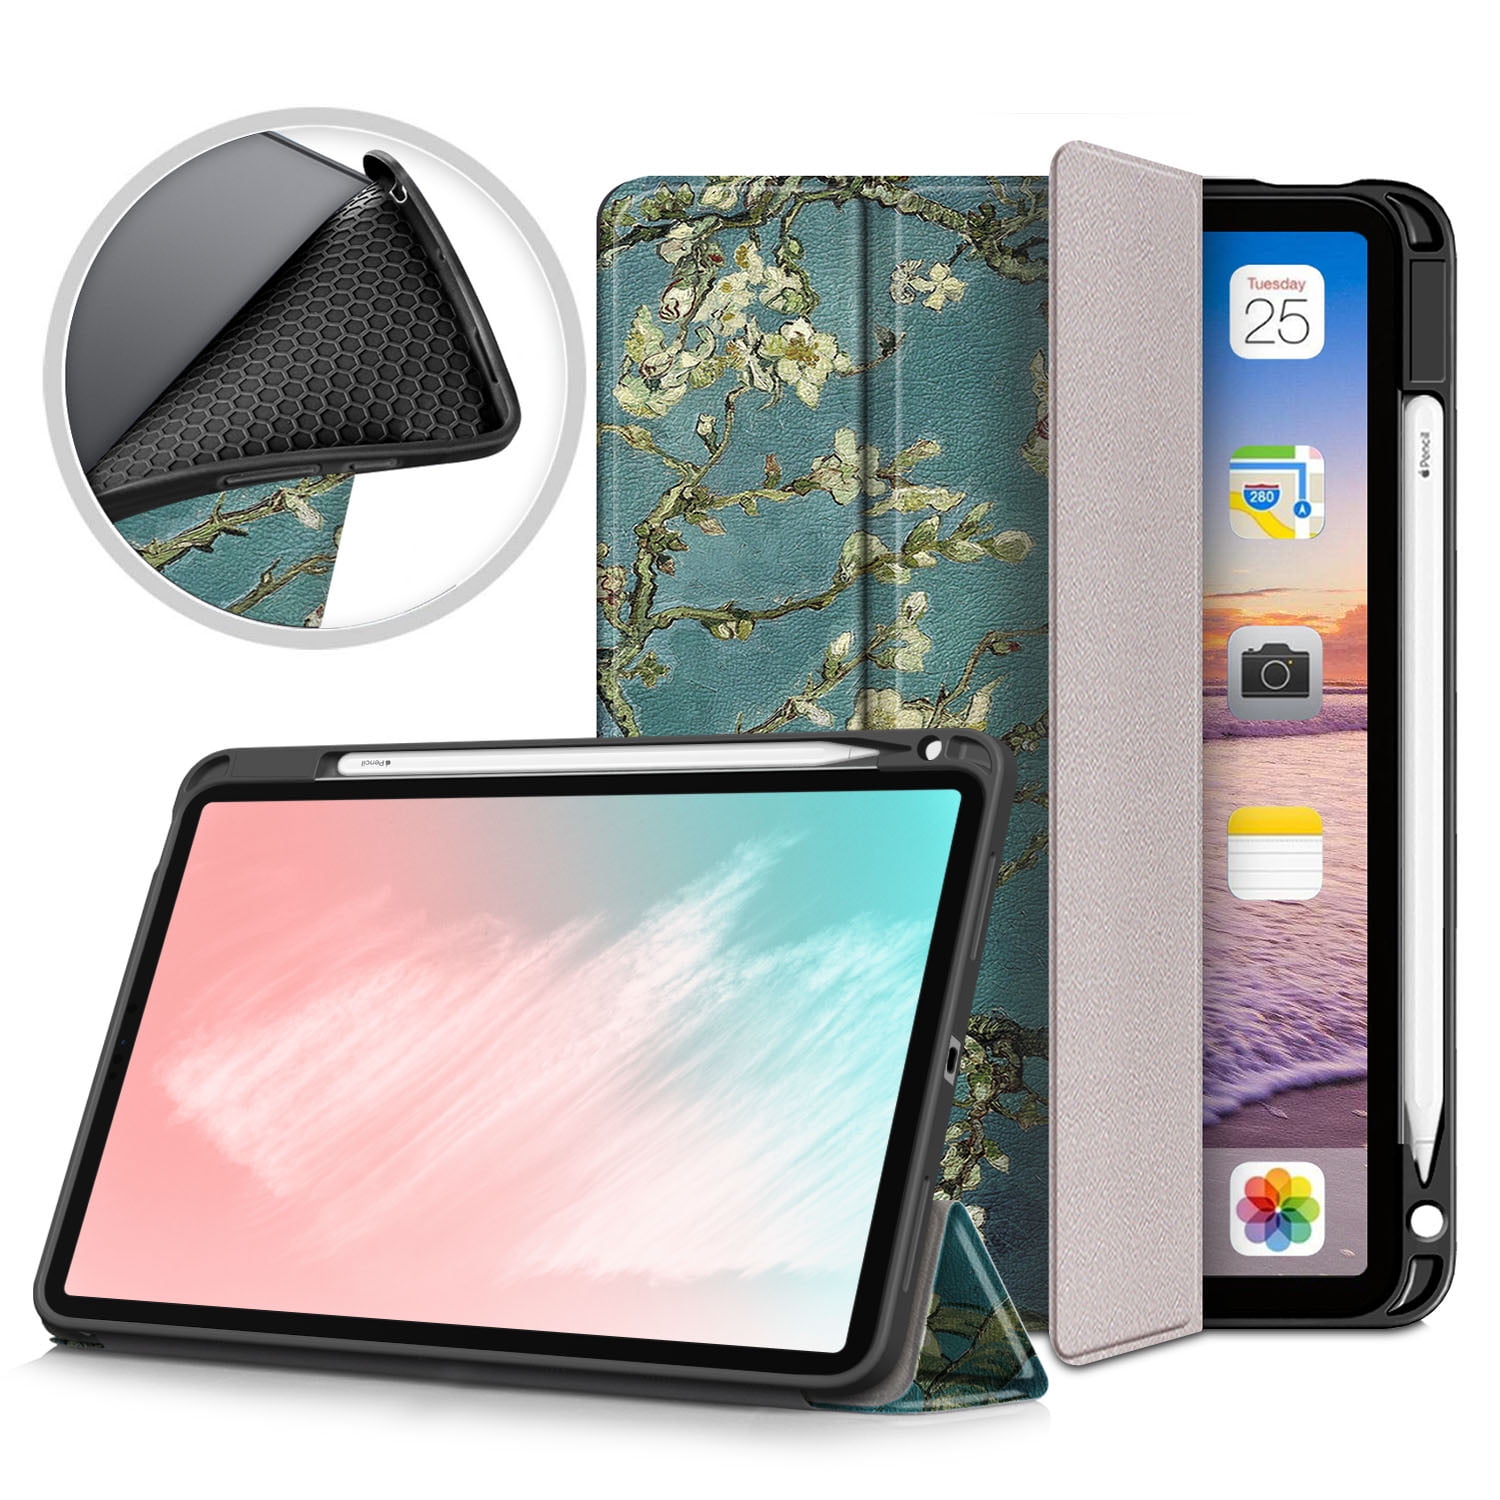 iPad Air 5th 4th Generation Case, 10.9" Case 2020, Allytech Ultra Slim Trifold Stand Protective Multi Angle Stand Holder Case Cover for Apple iPad Air 4 5, Eiffel Tower - Walmart.com